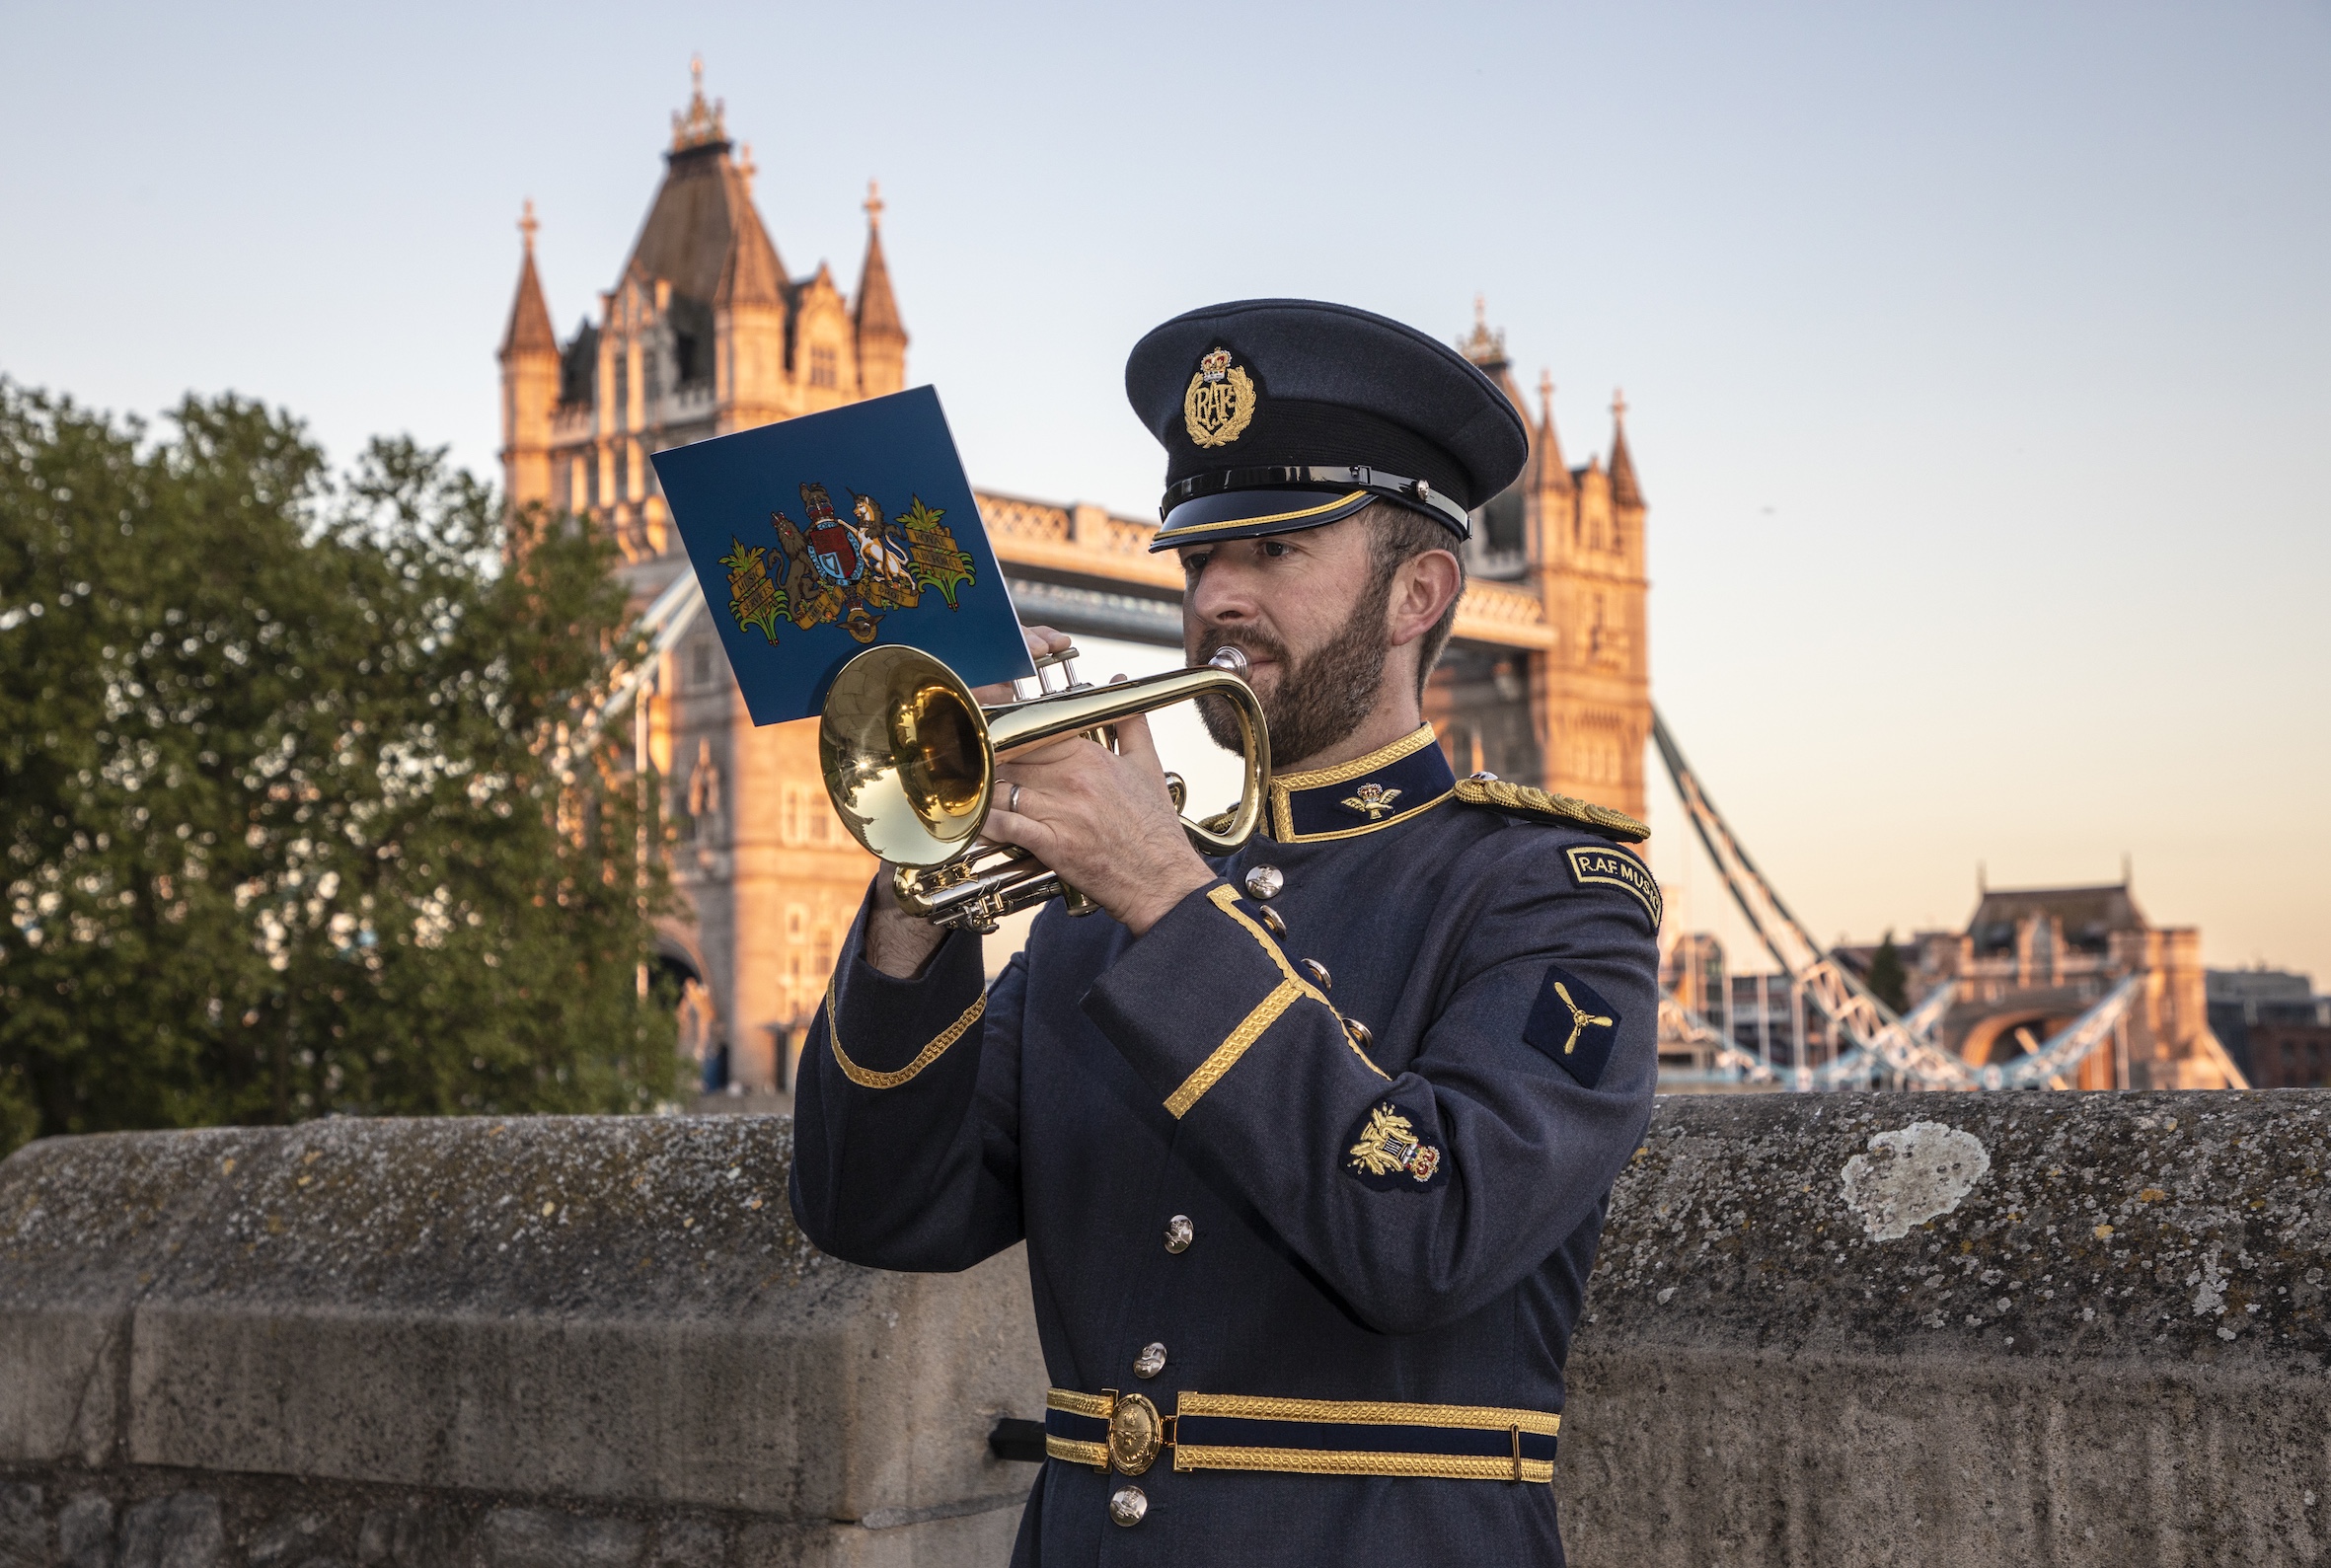 RAF Musician plays the trumpet.